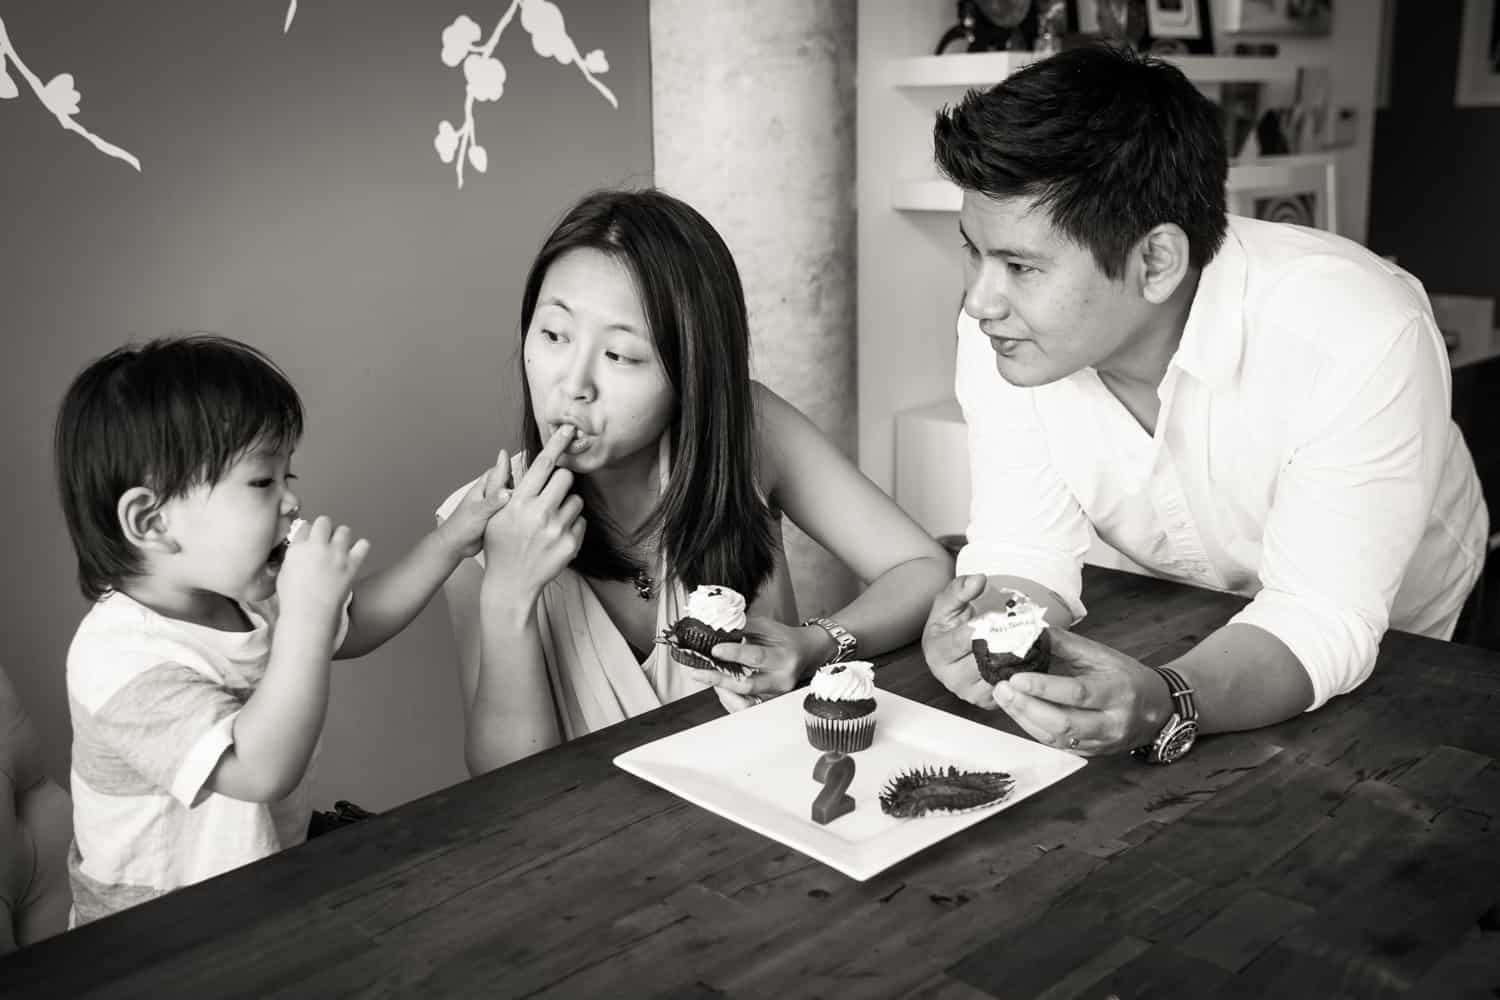 Black and white photo of parents and child eating cupcakes